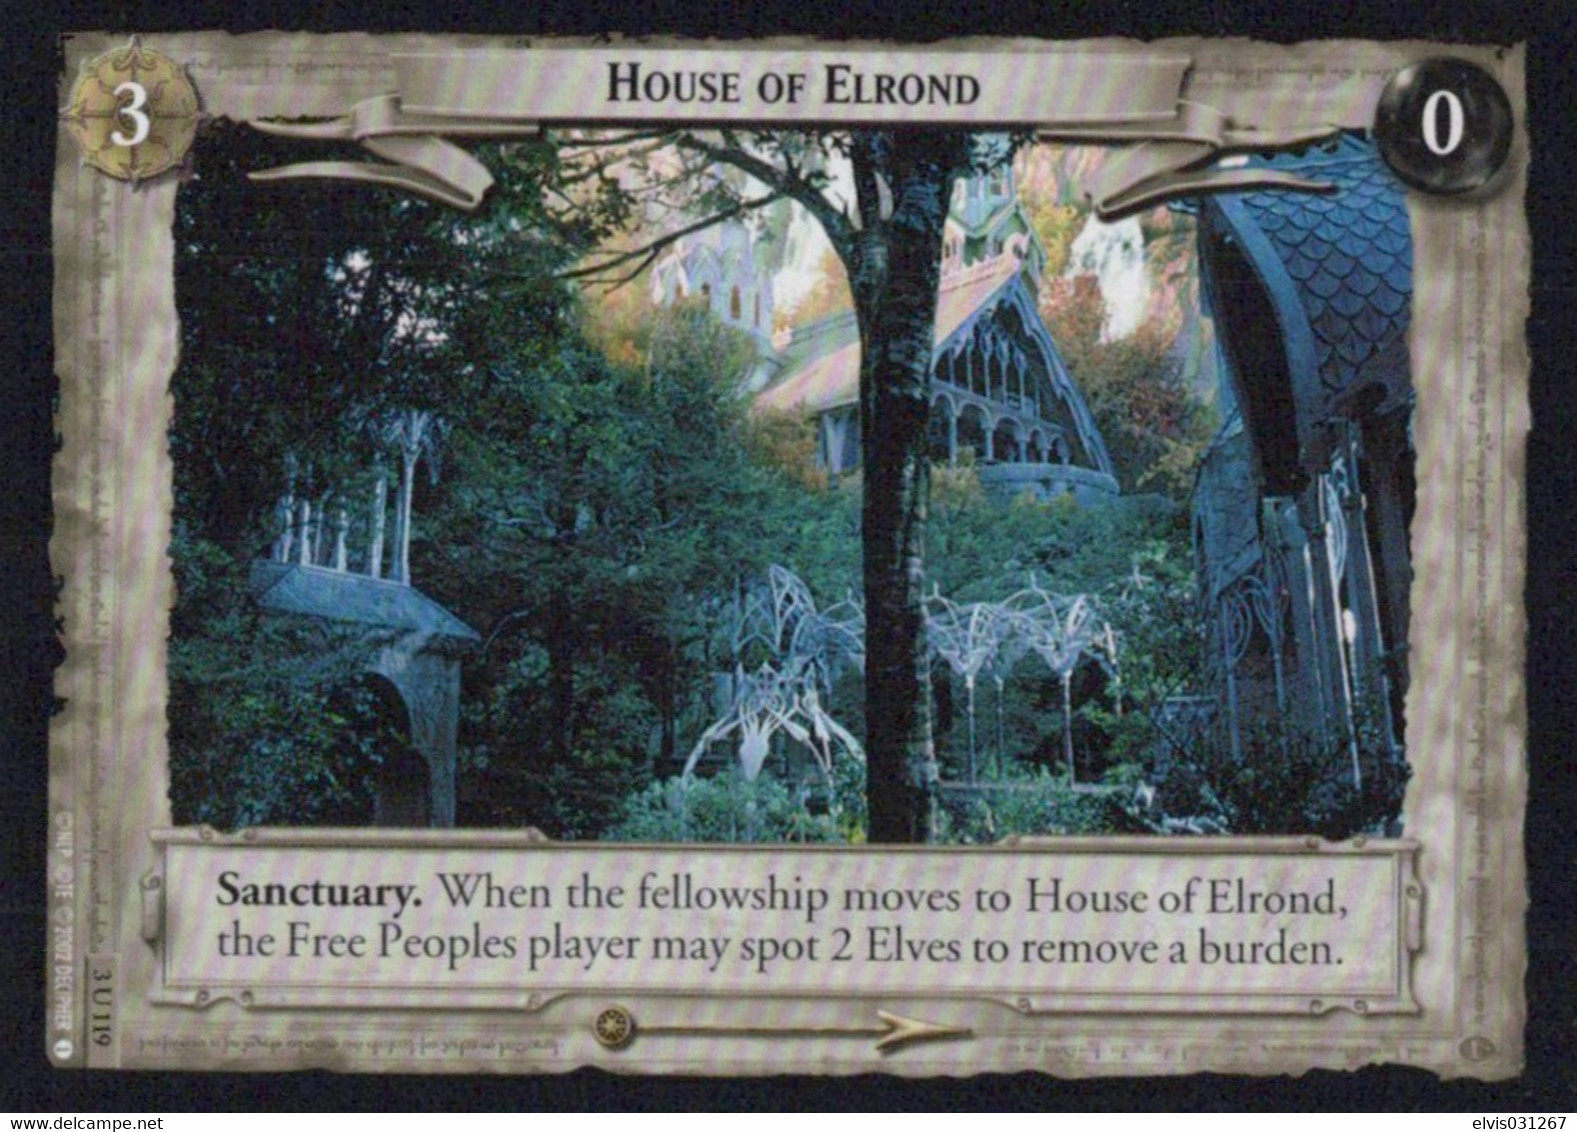 Vintage The Lord Of The Rings: #0-3 House Of Elrond - EN - 2001-2004 - Mint Condition - Trading Card Game - Herr Der Ringe